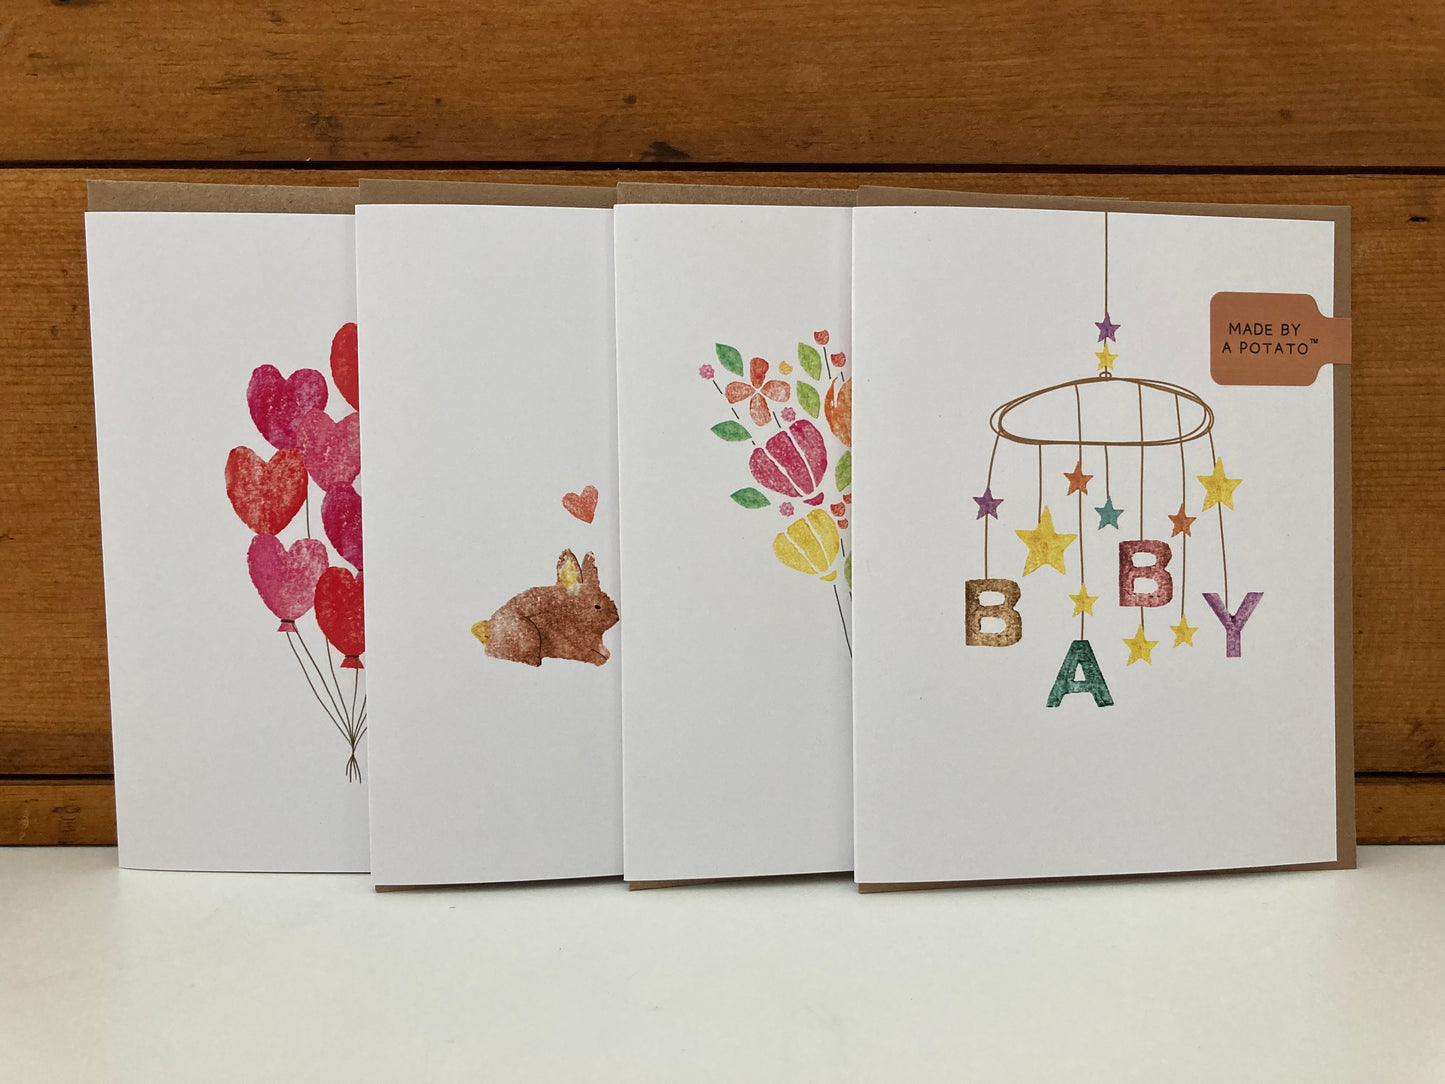 Greeting Cards - By a Potato BUNNY BABY LOVE